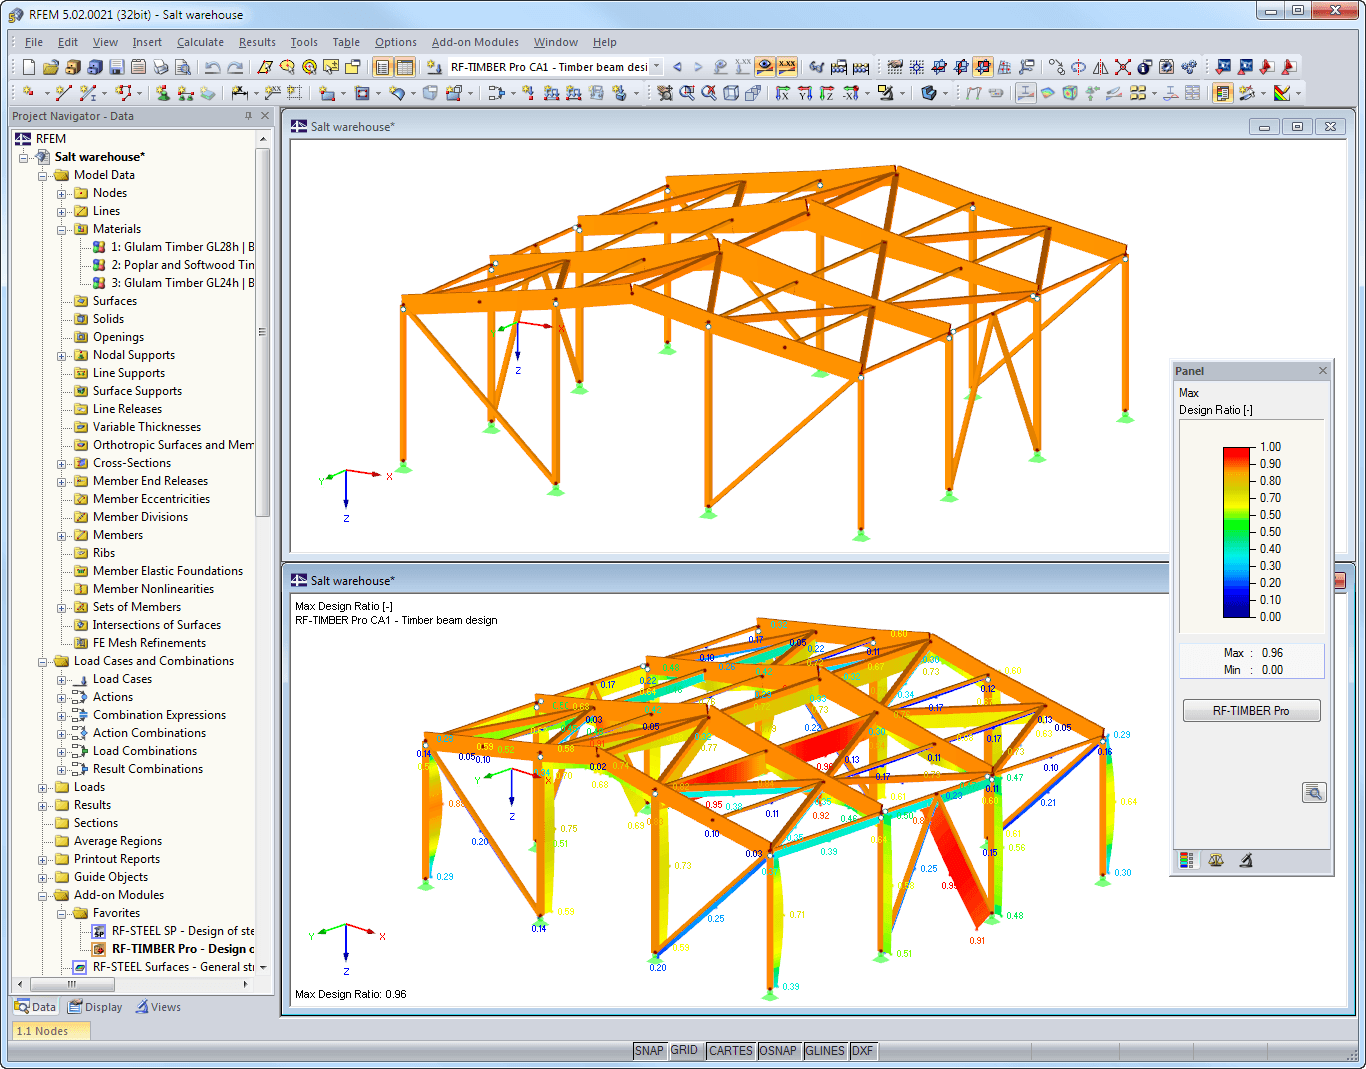 Graphical Representation of Timber Model with Design Ratio